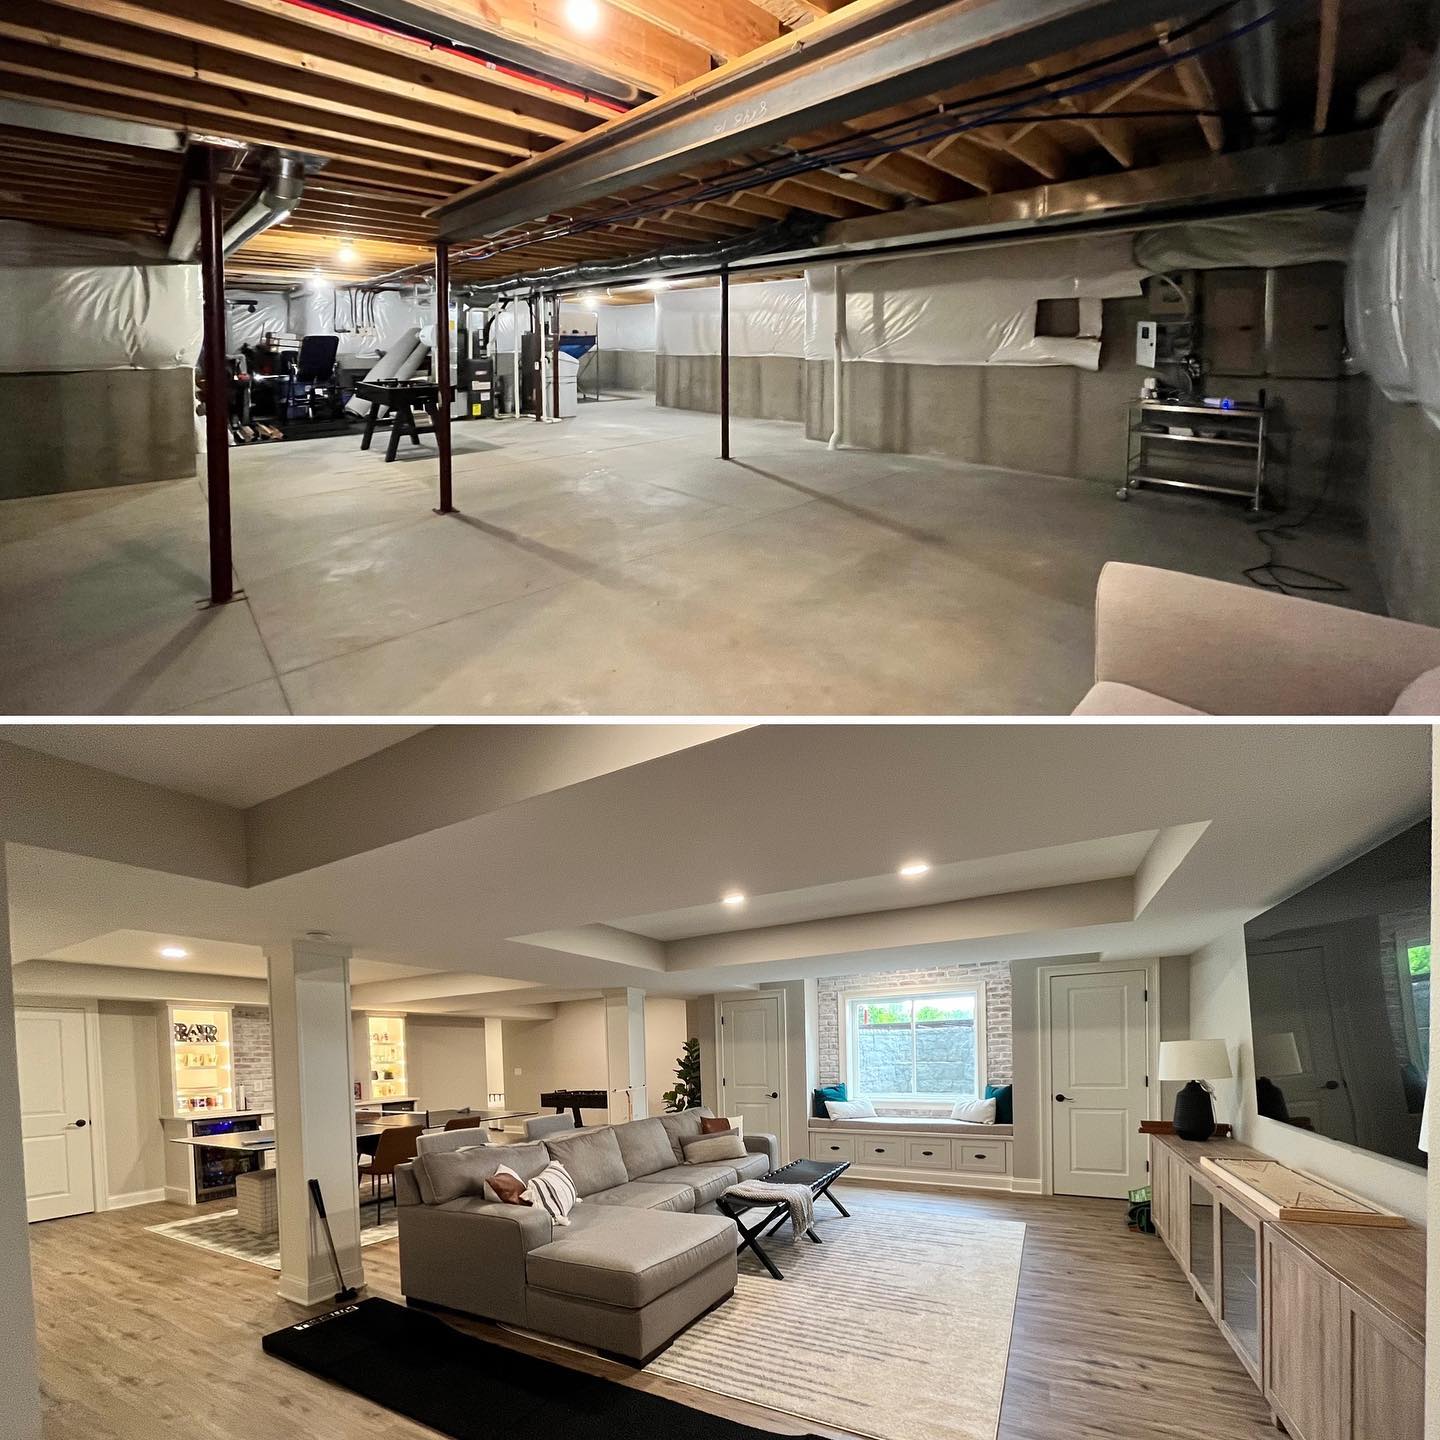 Top image: an unfinished basement with visible pipes and concrete floor. Bottom image: a finished basement with modern decor, featuring a sectional sofa, bar area, and natural light from windows.